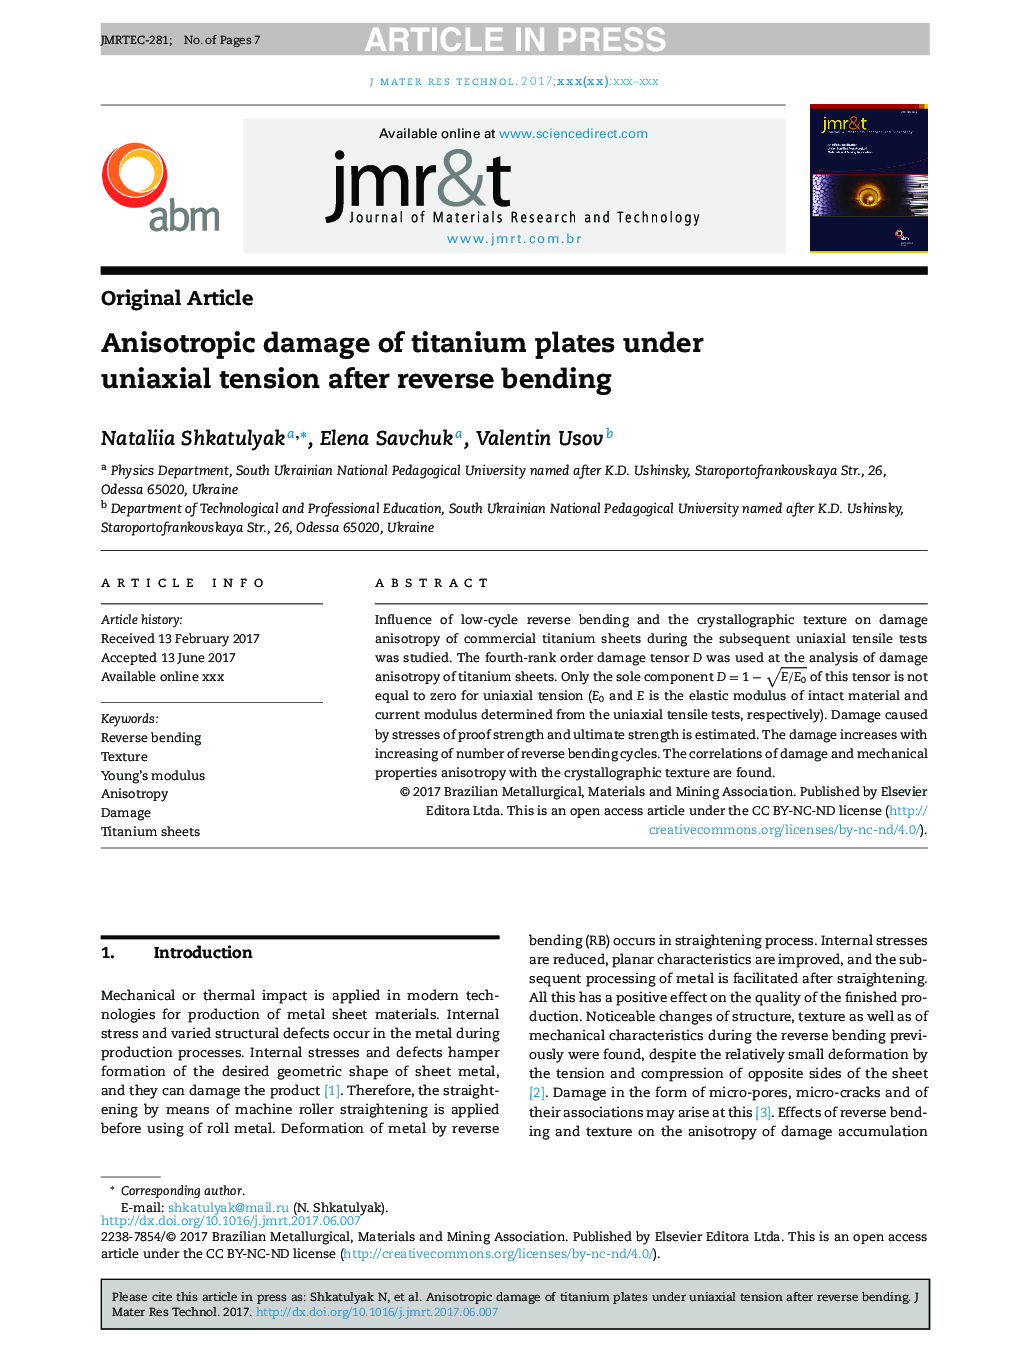 Anisotropic damage of titanium plates under uniaxial tension after reverse bending